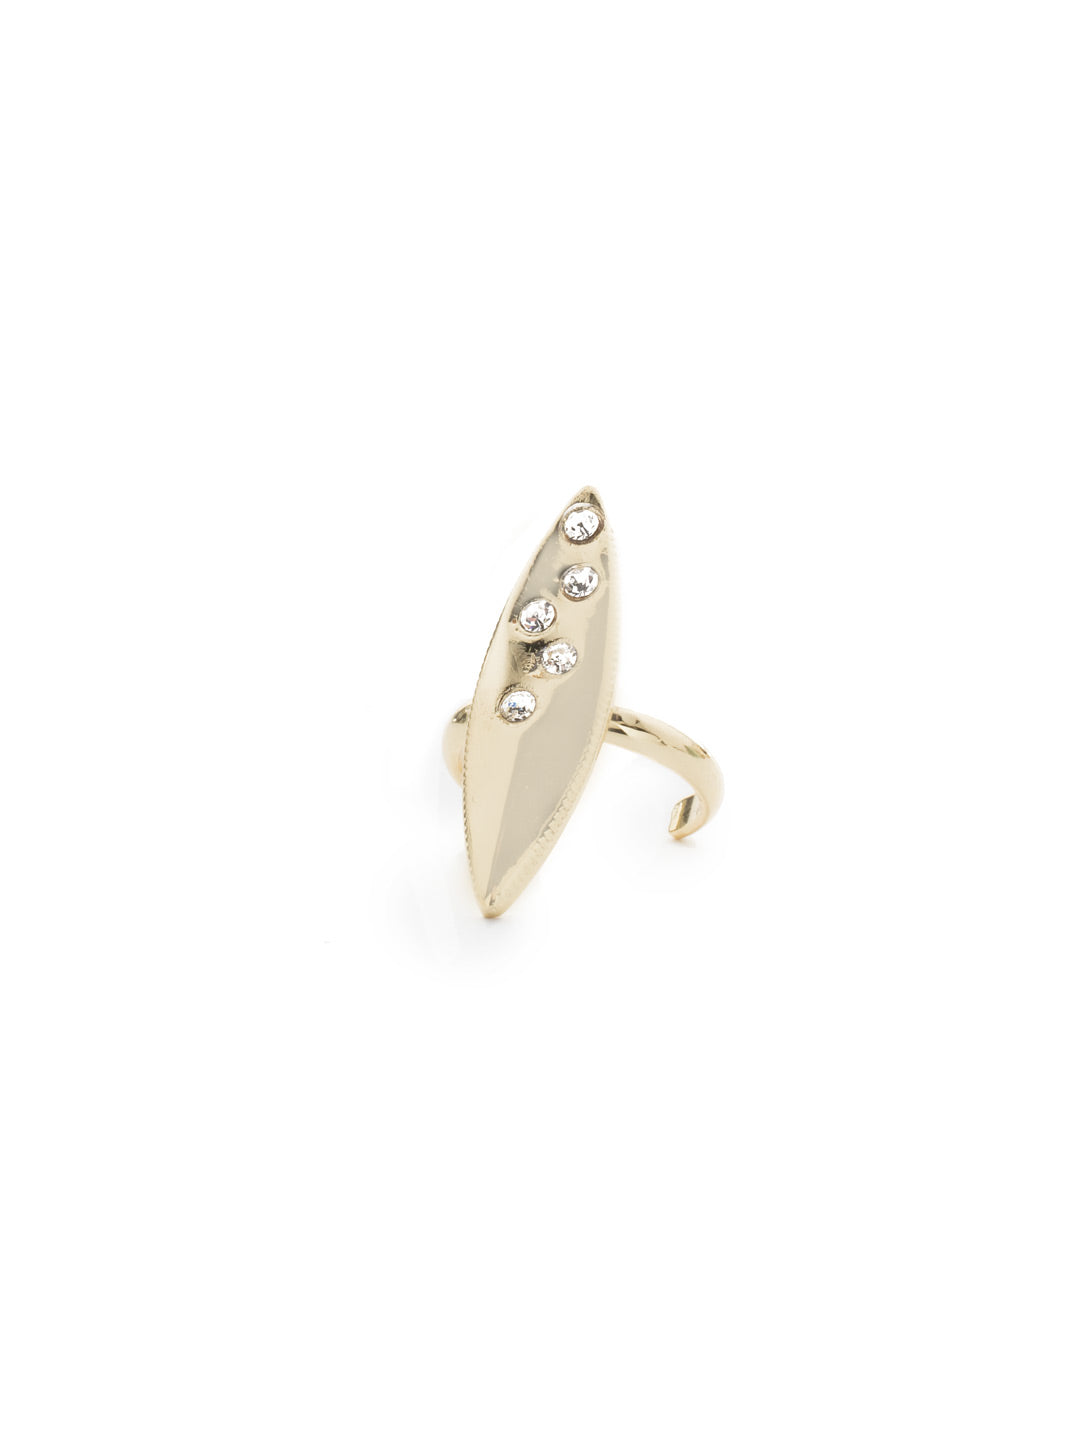 Elena Cocktail Ring - REB21BGCRY - <p>The Elena Ring is geometric and glam- a metal design with pave crystal details set atop a simple adjustable ring band. This ring is simple in design and spans from the base of your finger to the knuckle, making it modern and of the moment. From Sorrelli's Crystal collection in our Bright Gold-tone finish.</p>